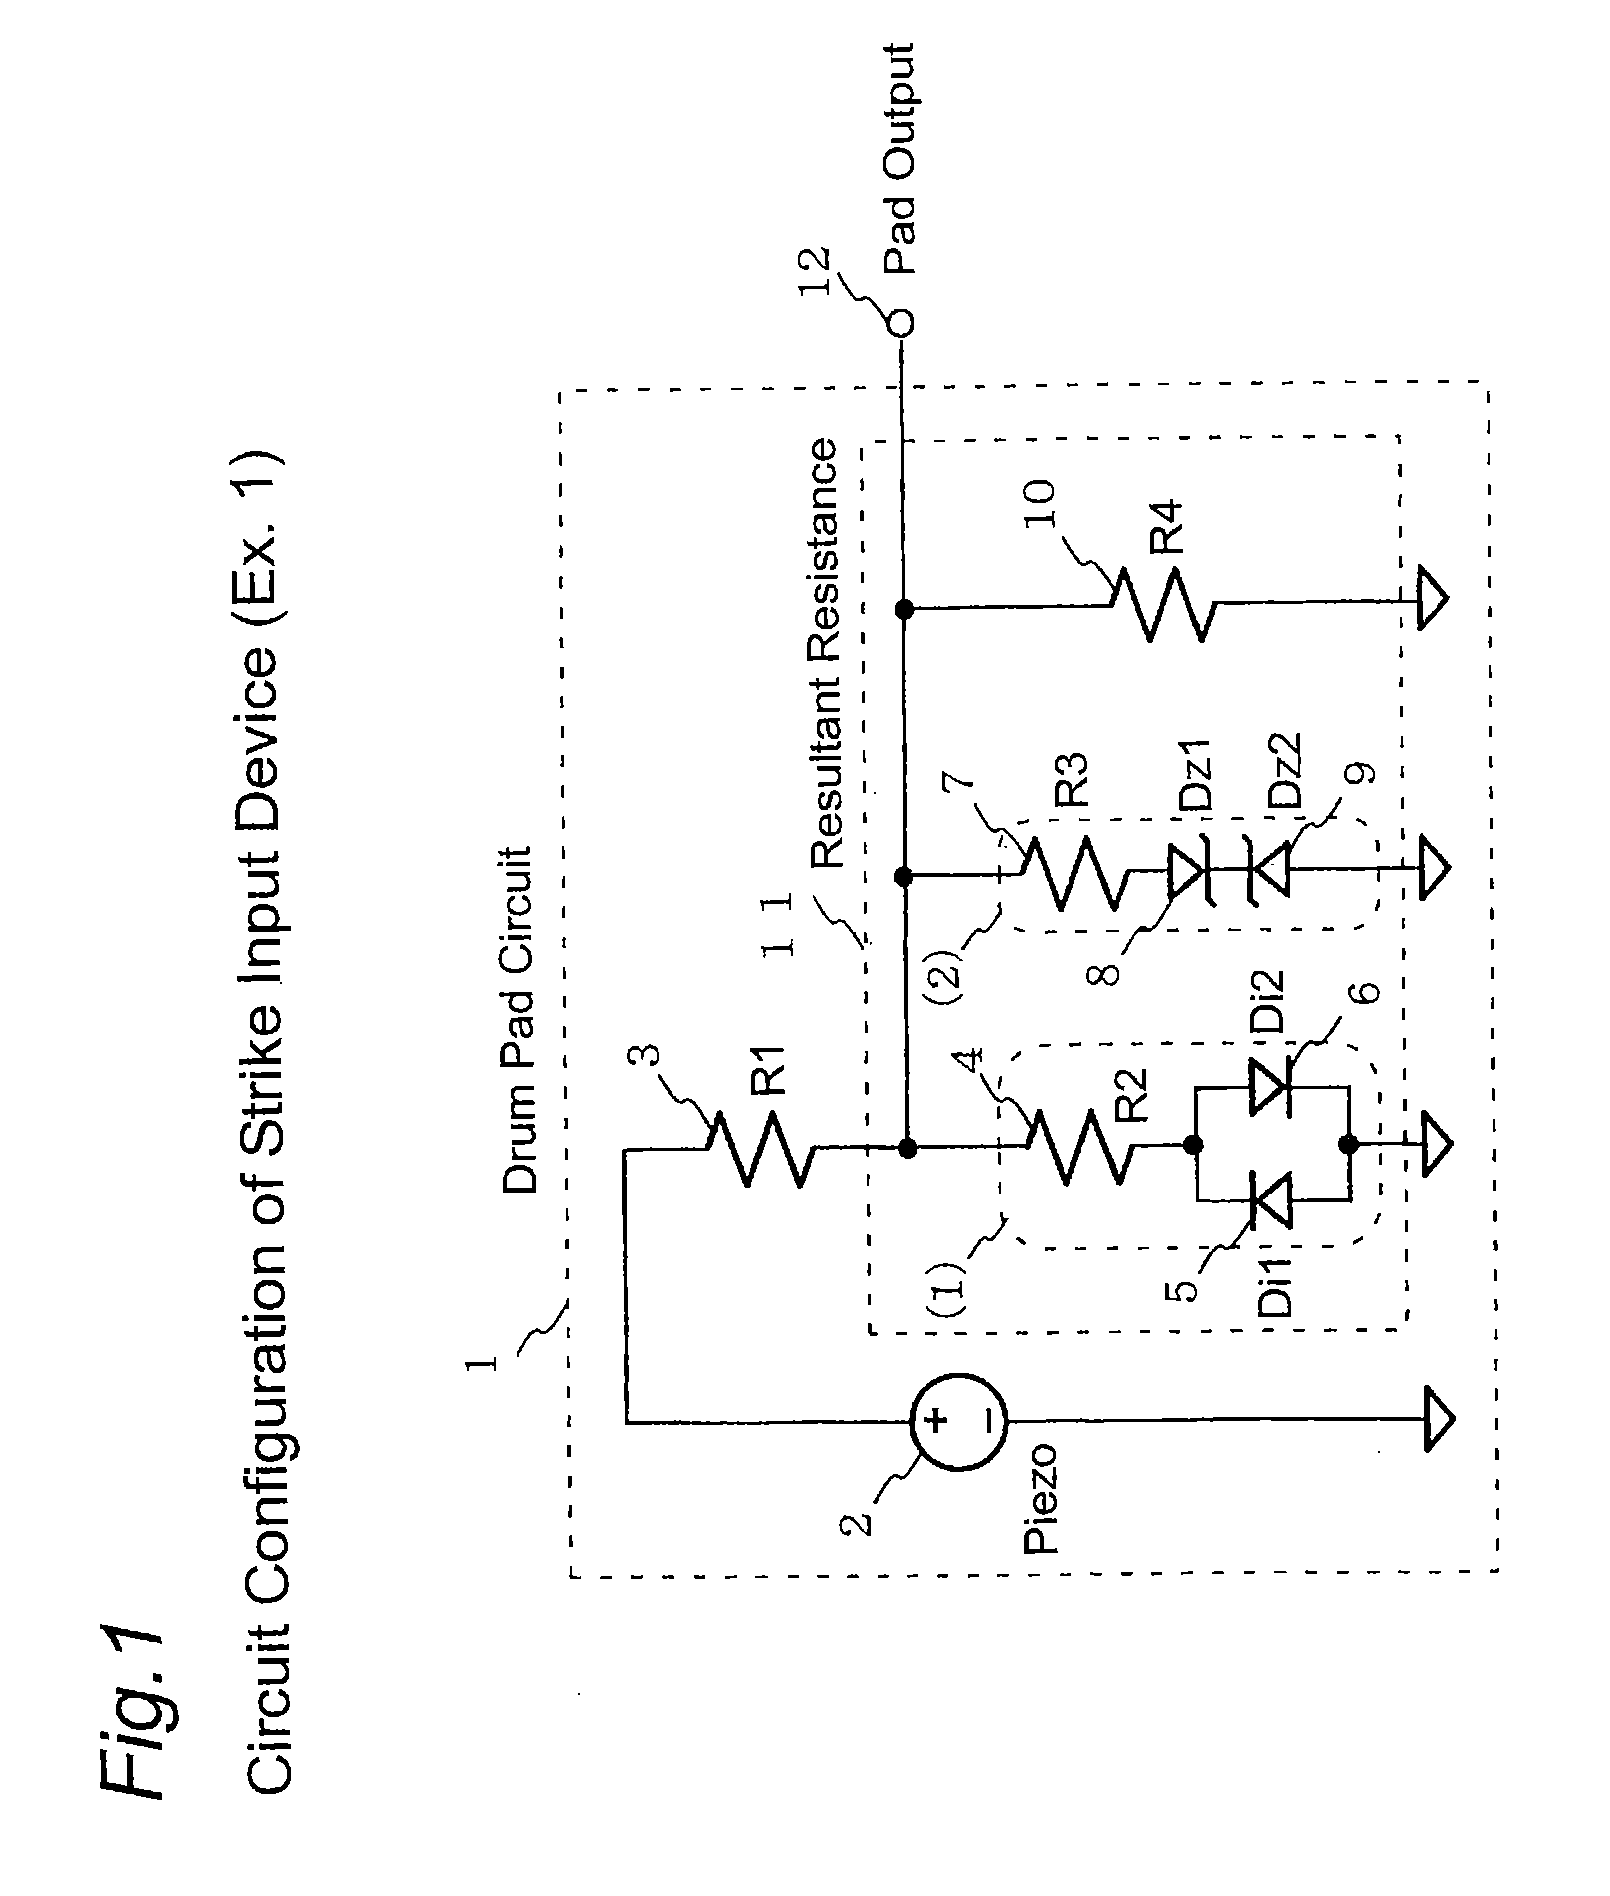 Strike Input Device for Electronic Percussion Instrument